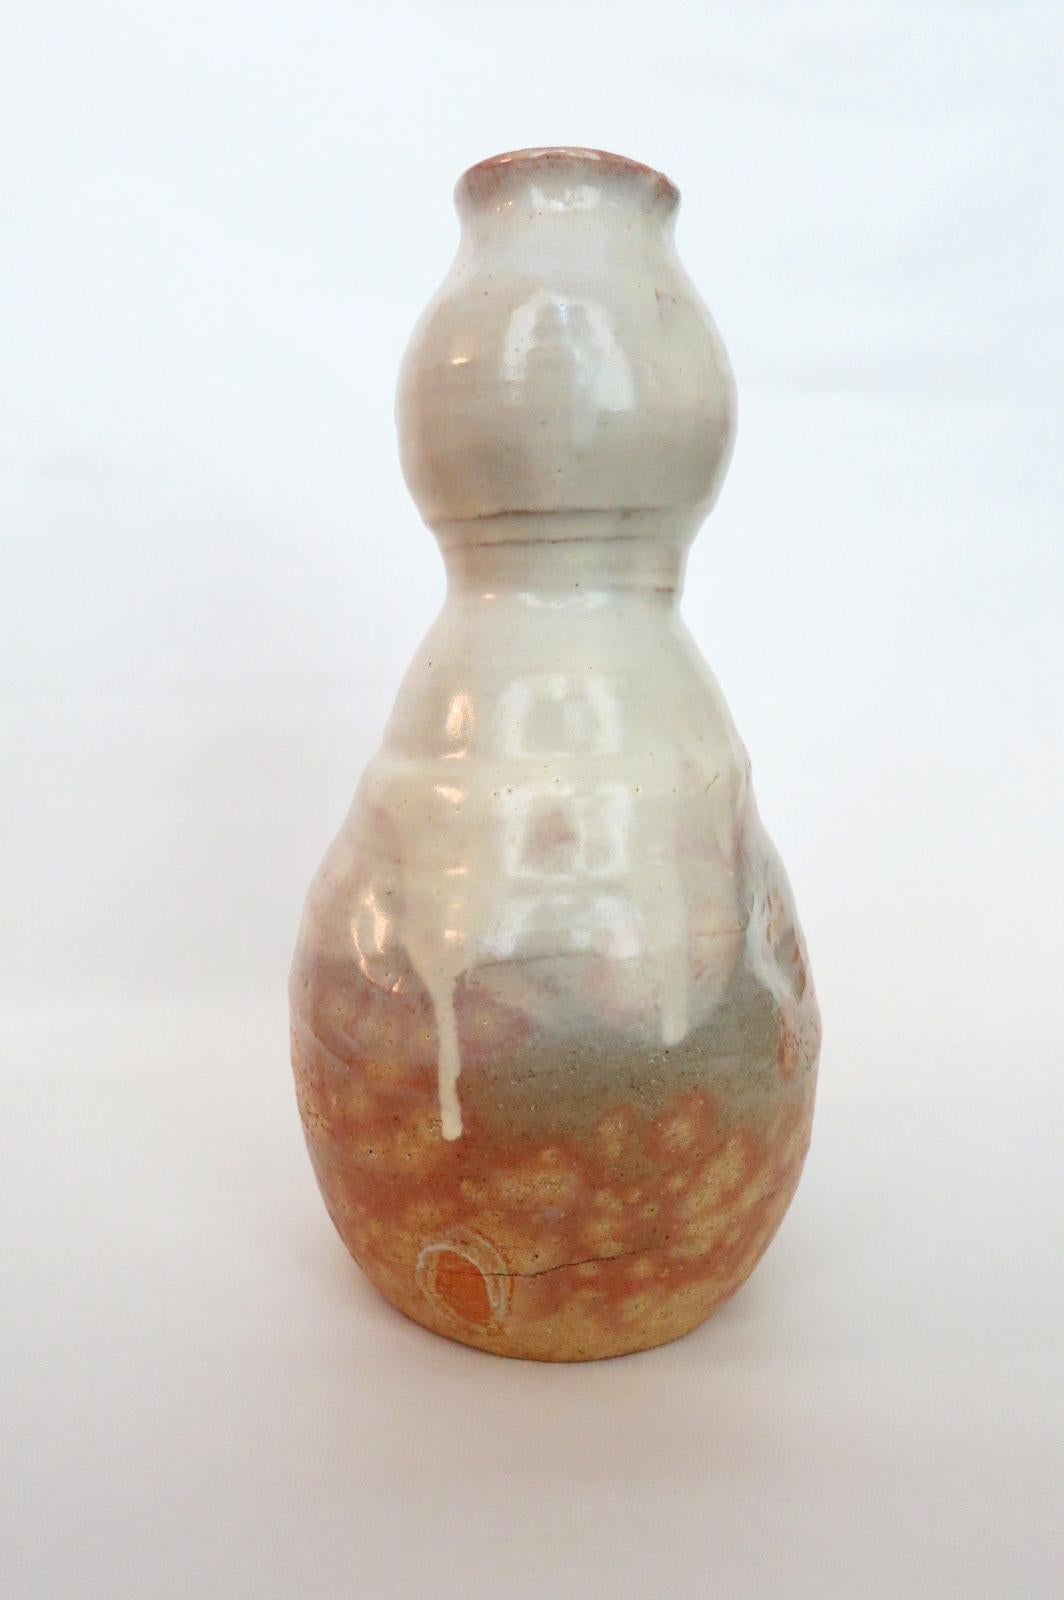 A stoneware vase with white dripping glaze from Hagi by Kyusetsu Miwa X (1895-1981), Showa Period. The vase is in the shape of 